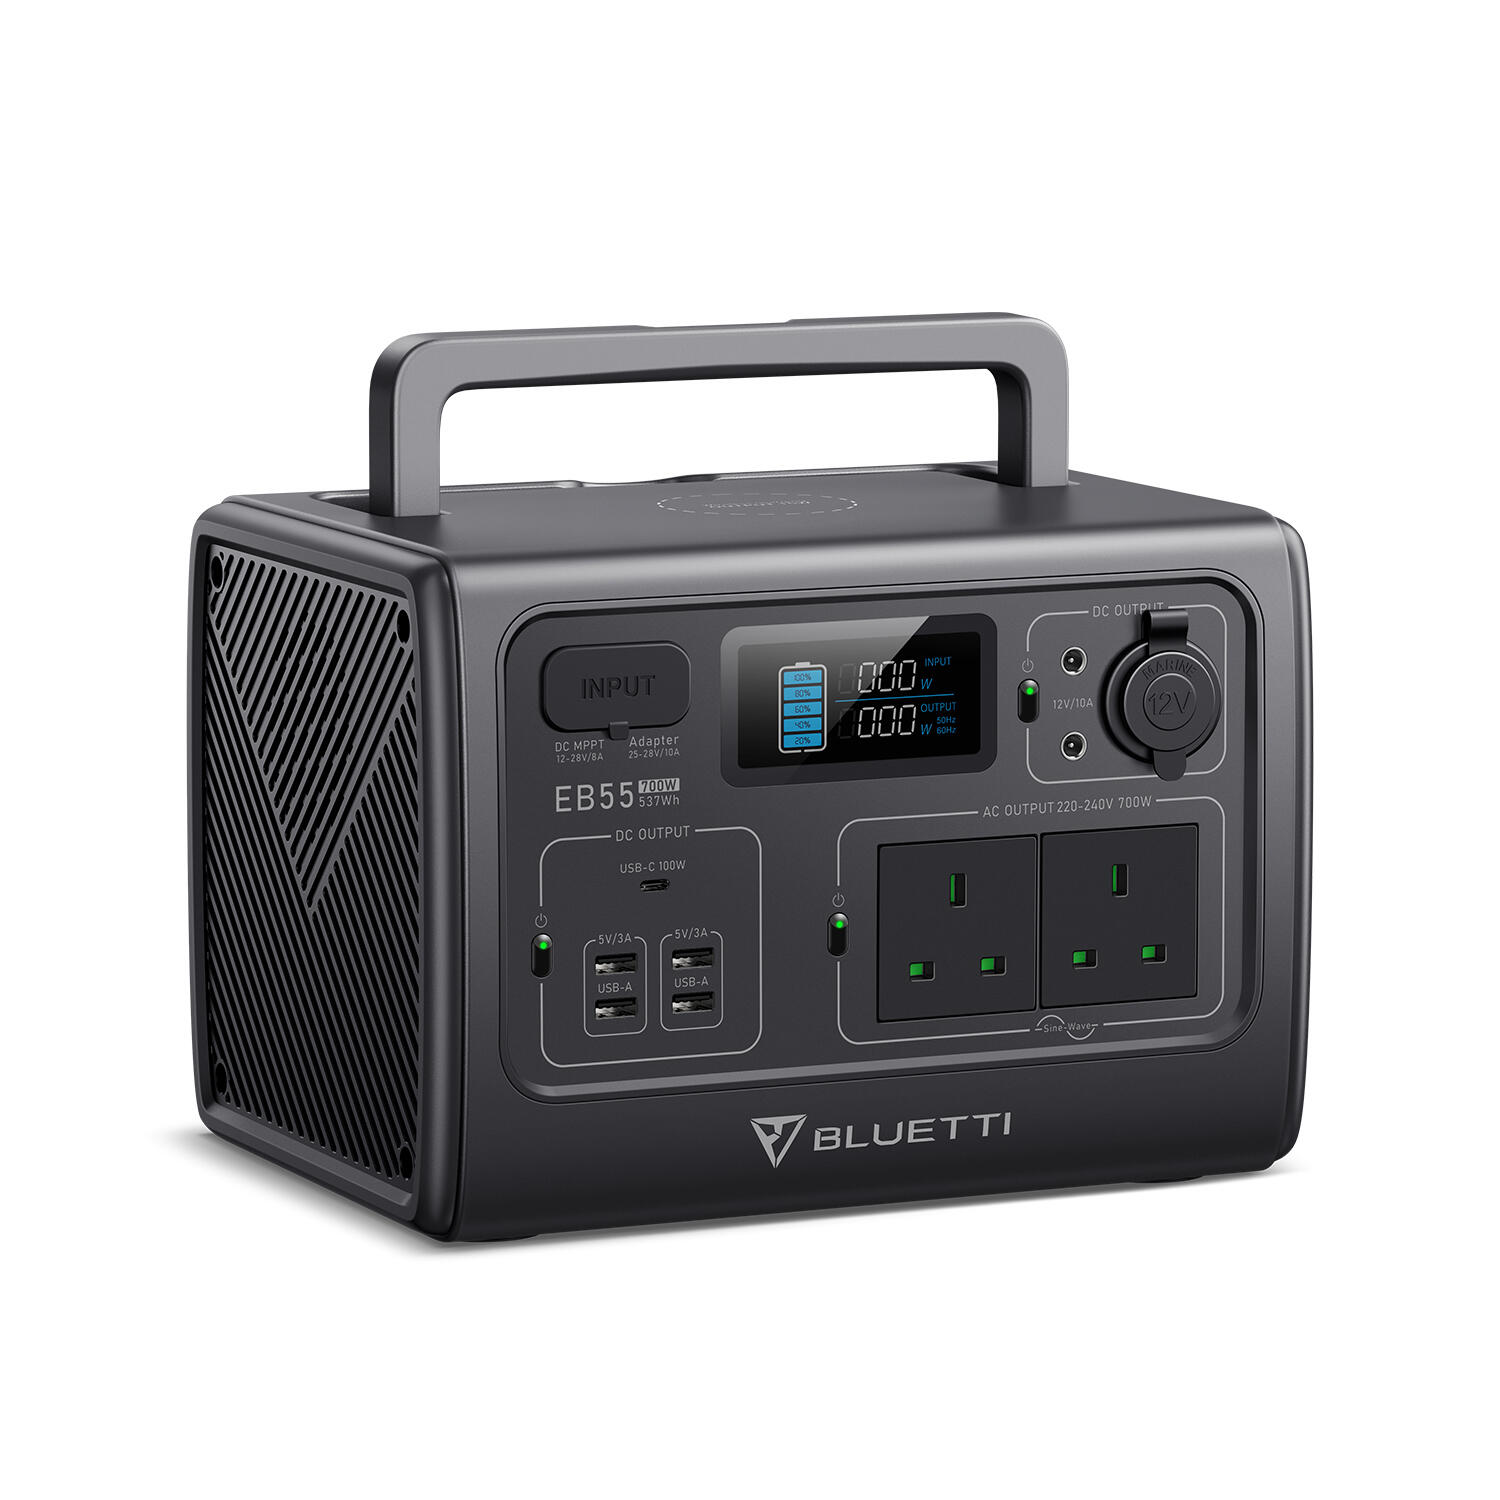 BLUETTI EB55 700W Portable Power Station 537Wh LiFePO4 Battery for Camping 1/5